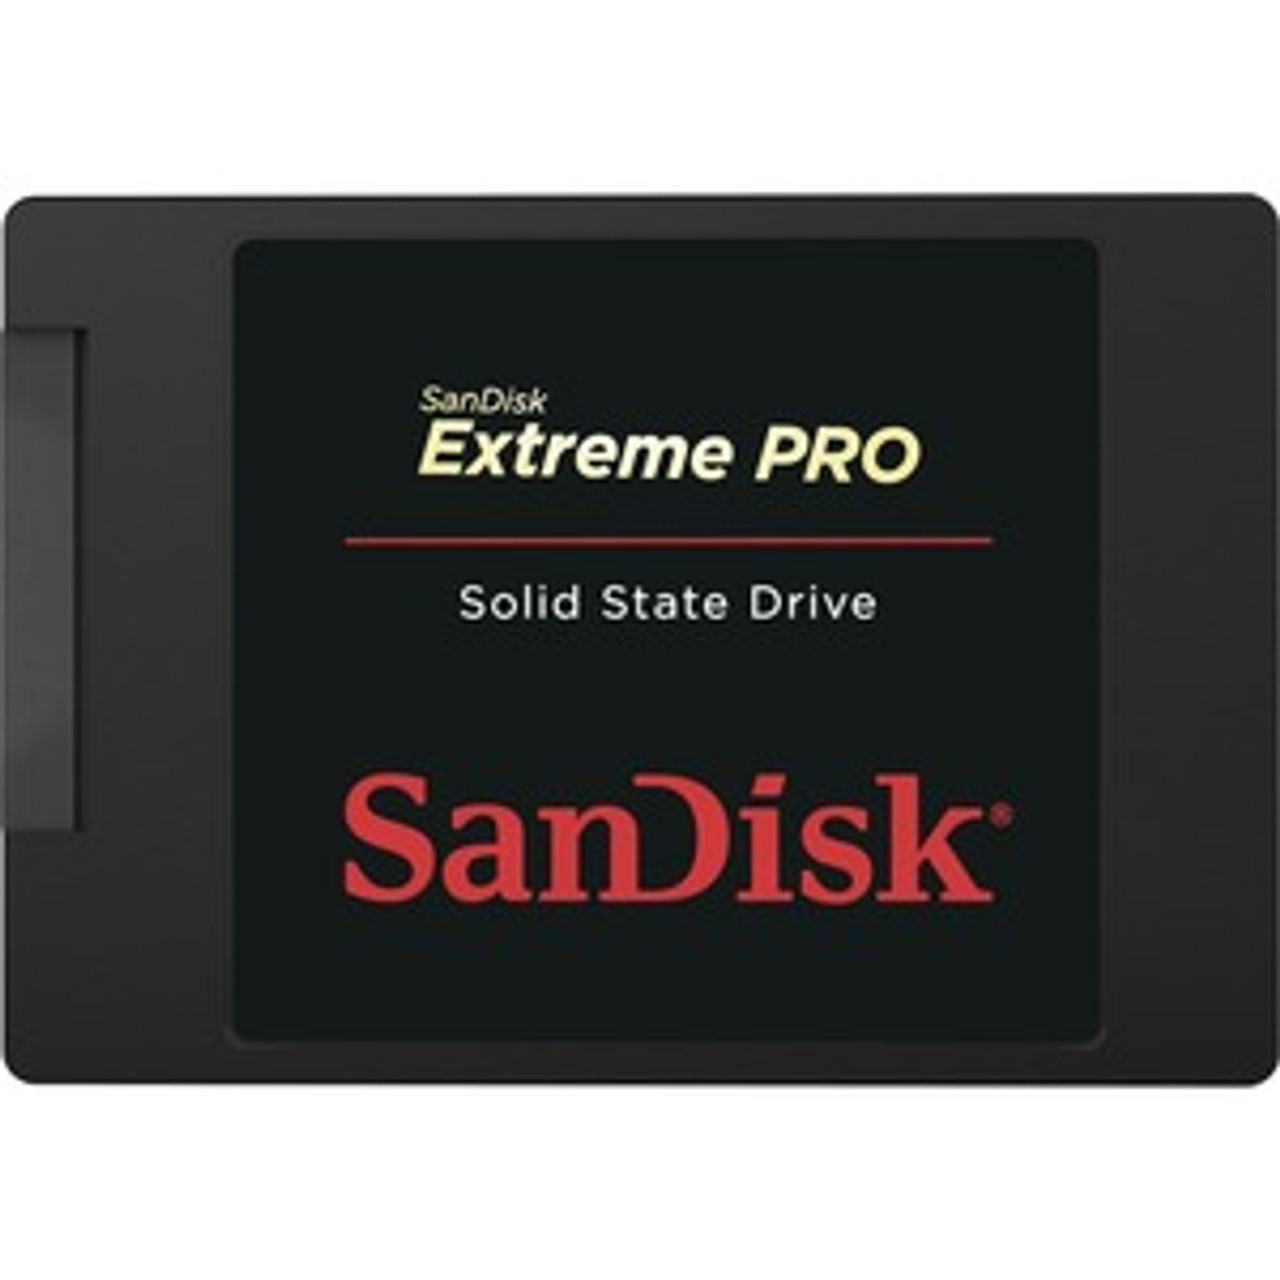 SDSSDXPS240GG25M SanDisk Extreme PRO 240GB MLC SATA 6Gbps 2.5-inch Internal Solid State Drive (SSD)